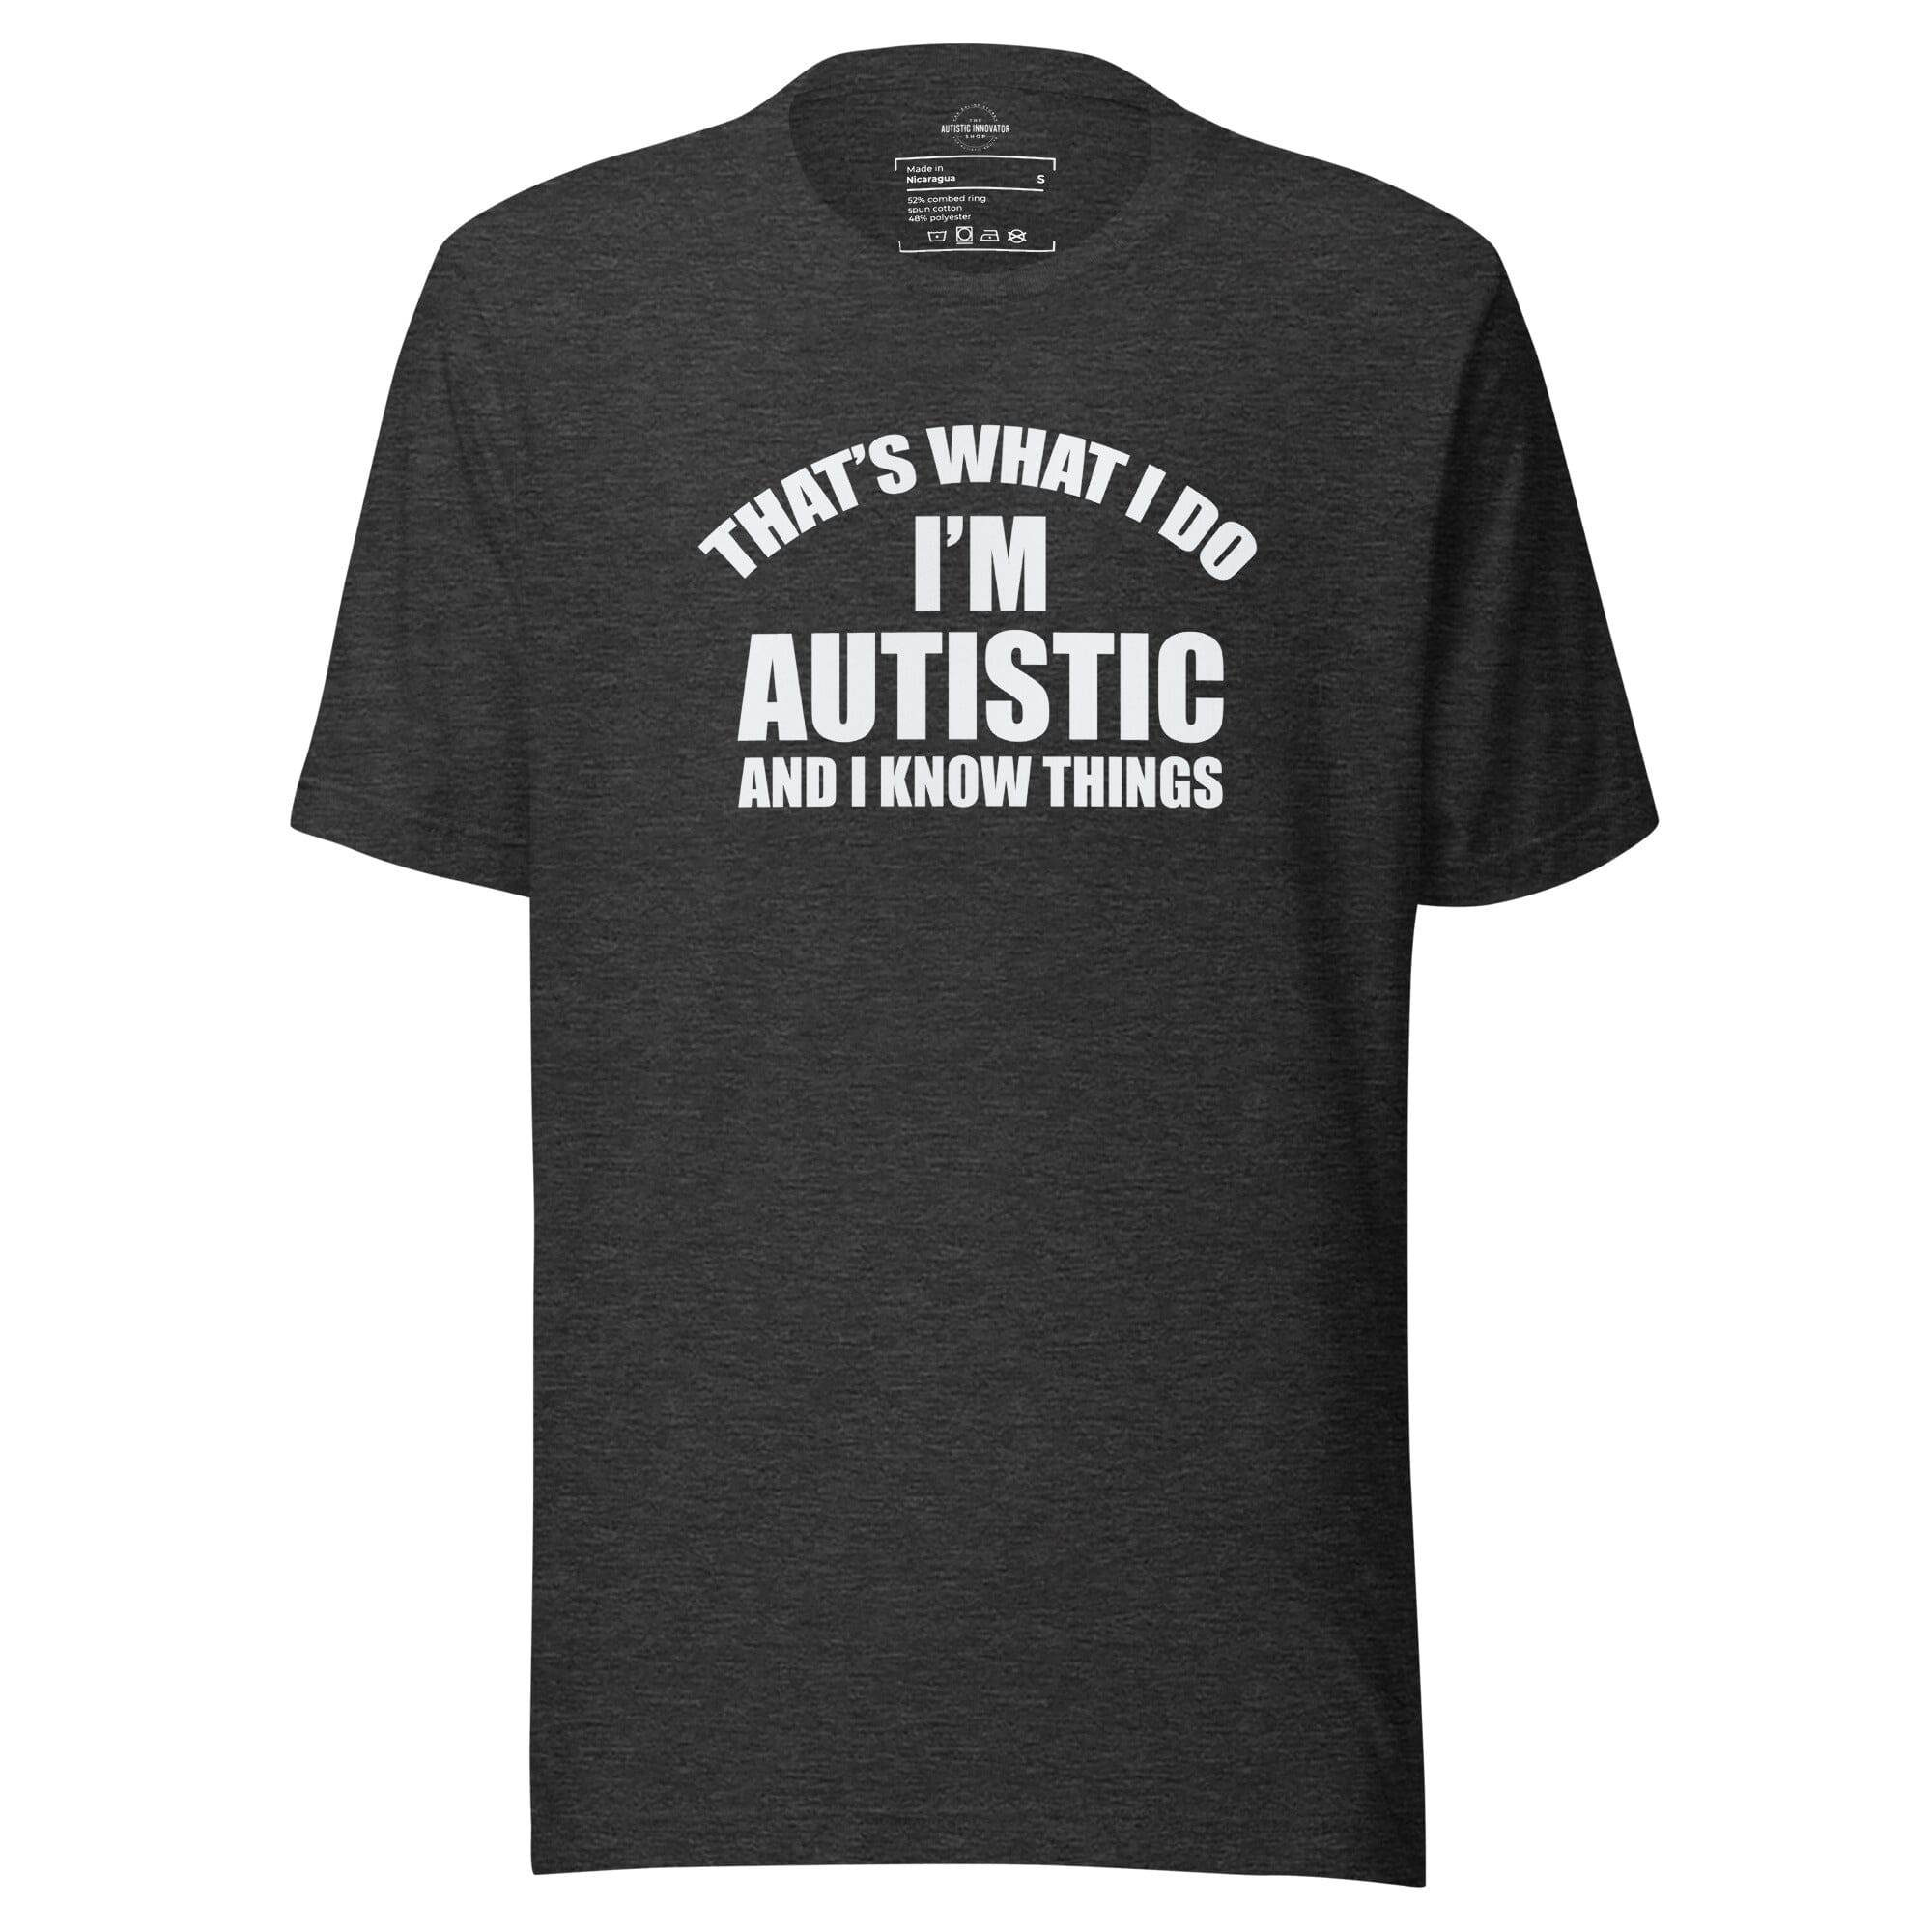 That's What I Do, I'm Autistic and I Know Things Unisex t-shirt The Autistic Innovator Dark Grey Heather S 